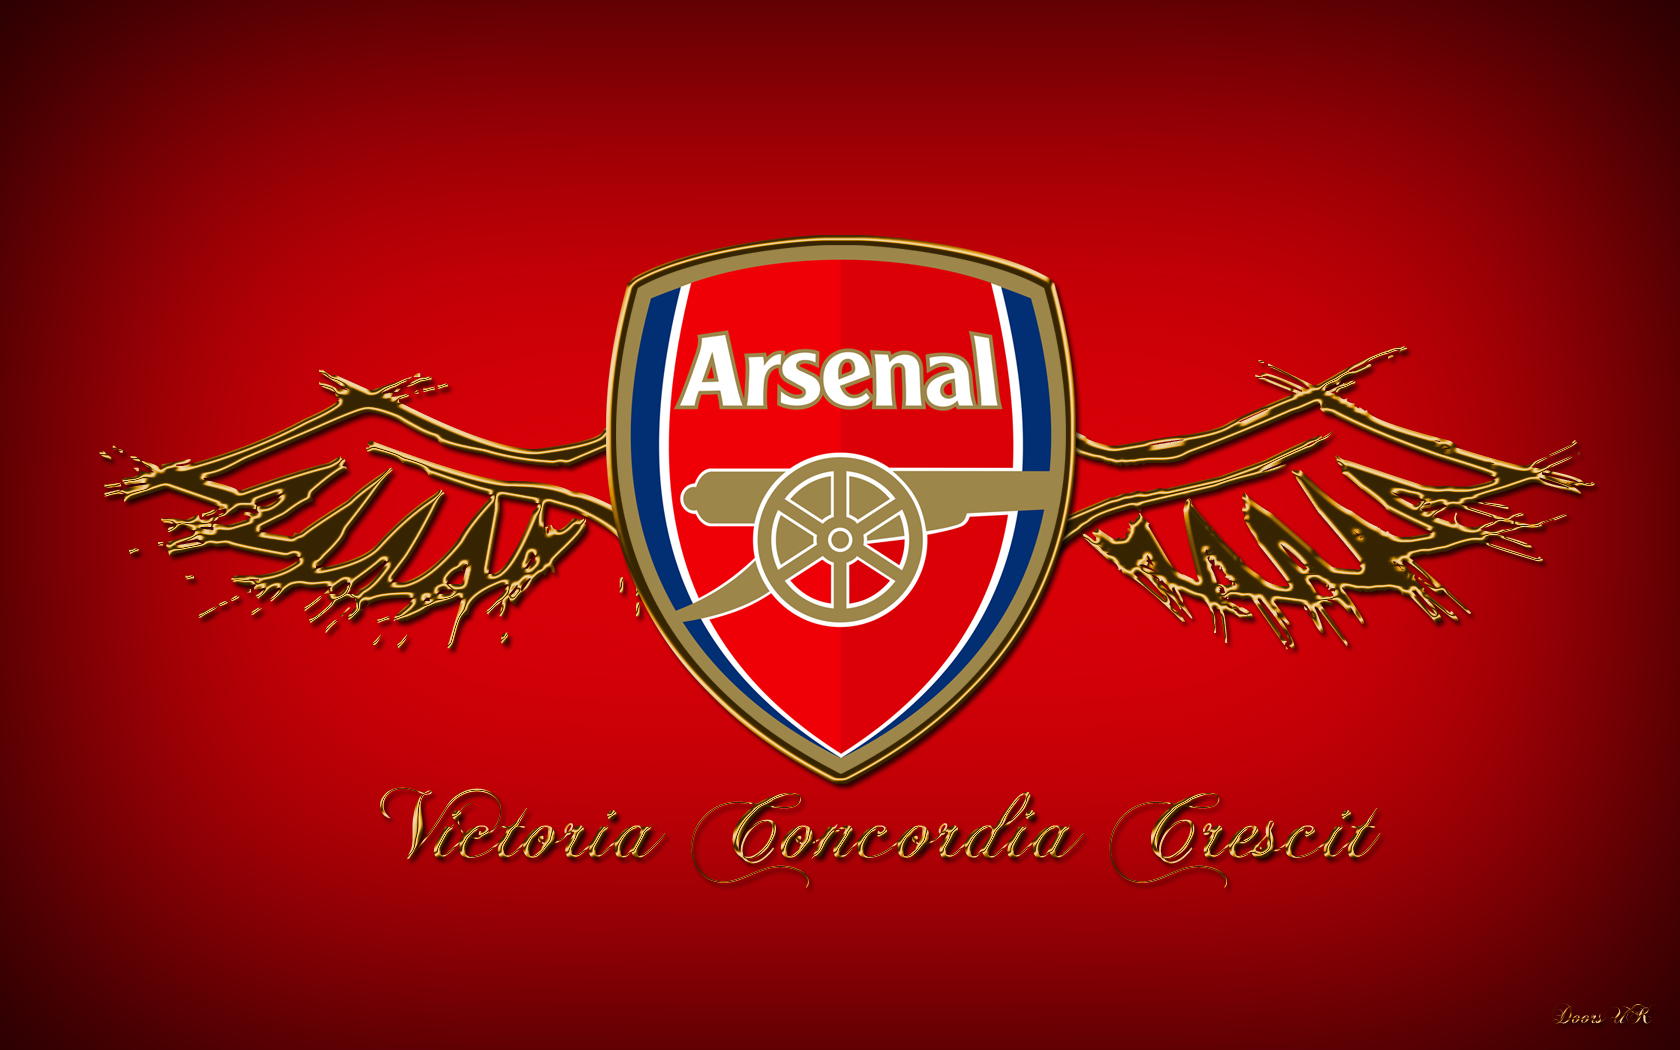 Arsenal The Best Football Club in Europe 2012   Best Football Club  football club europe